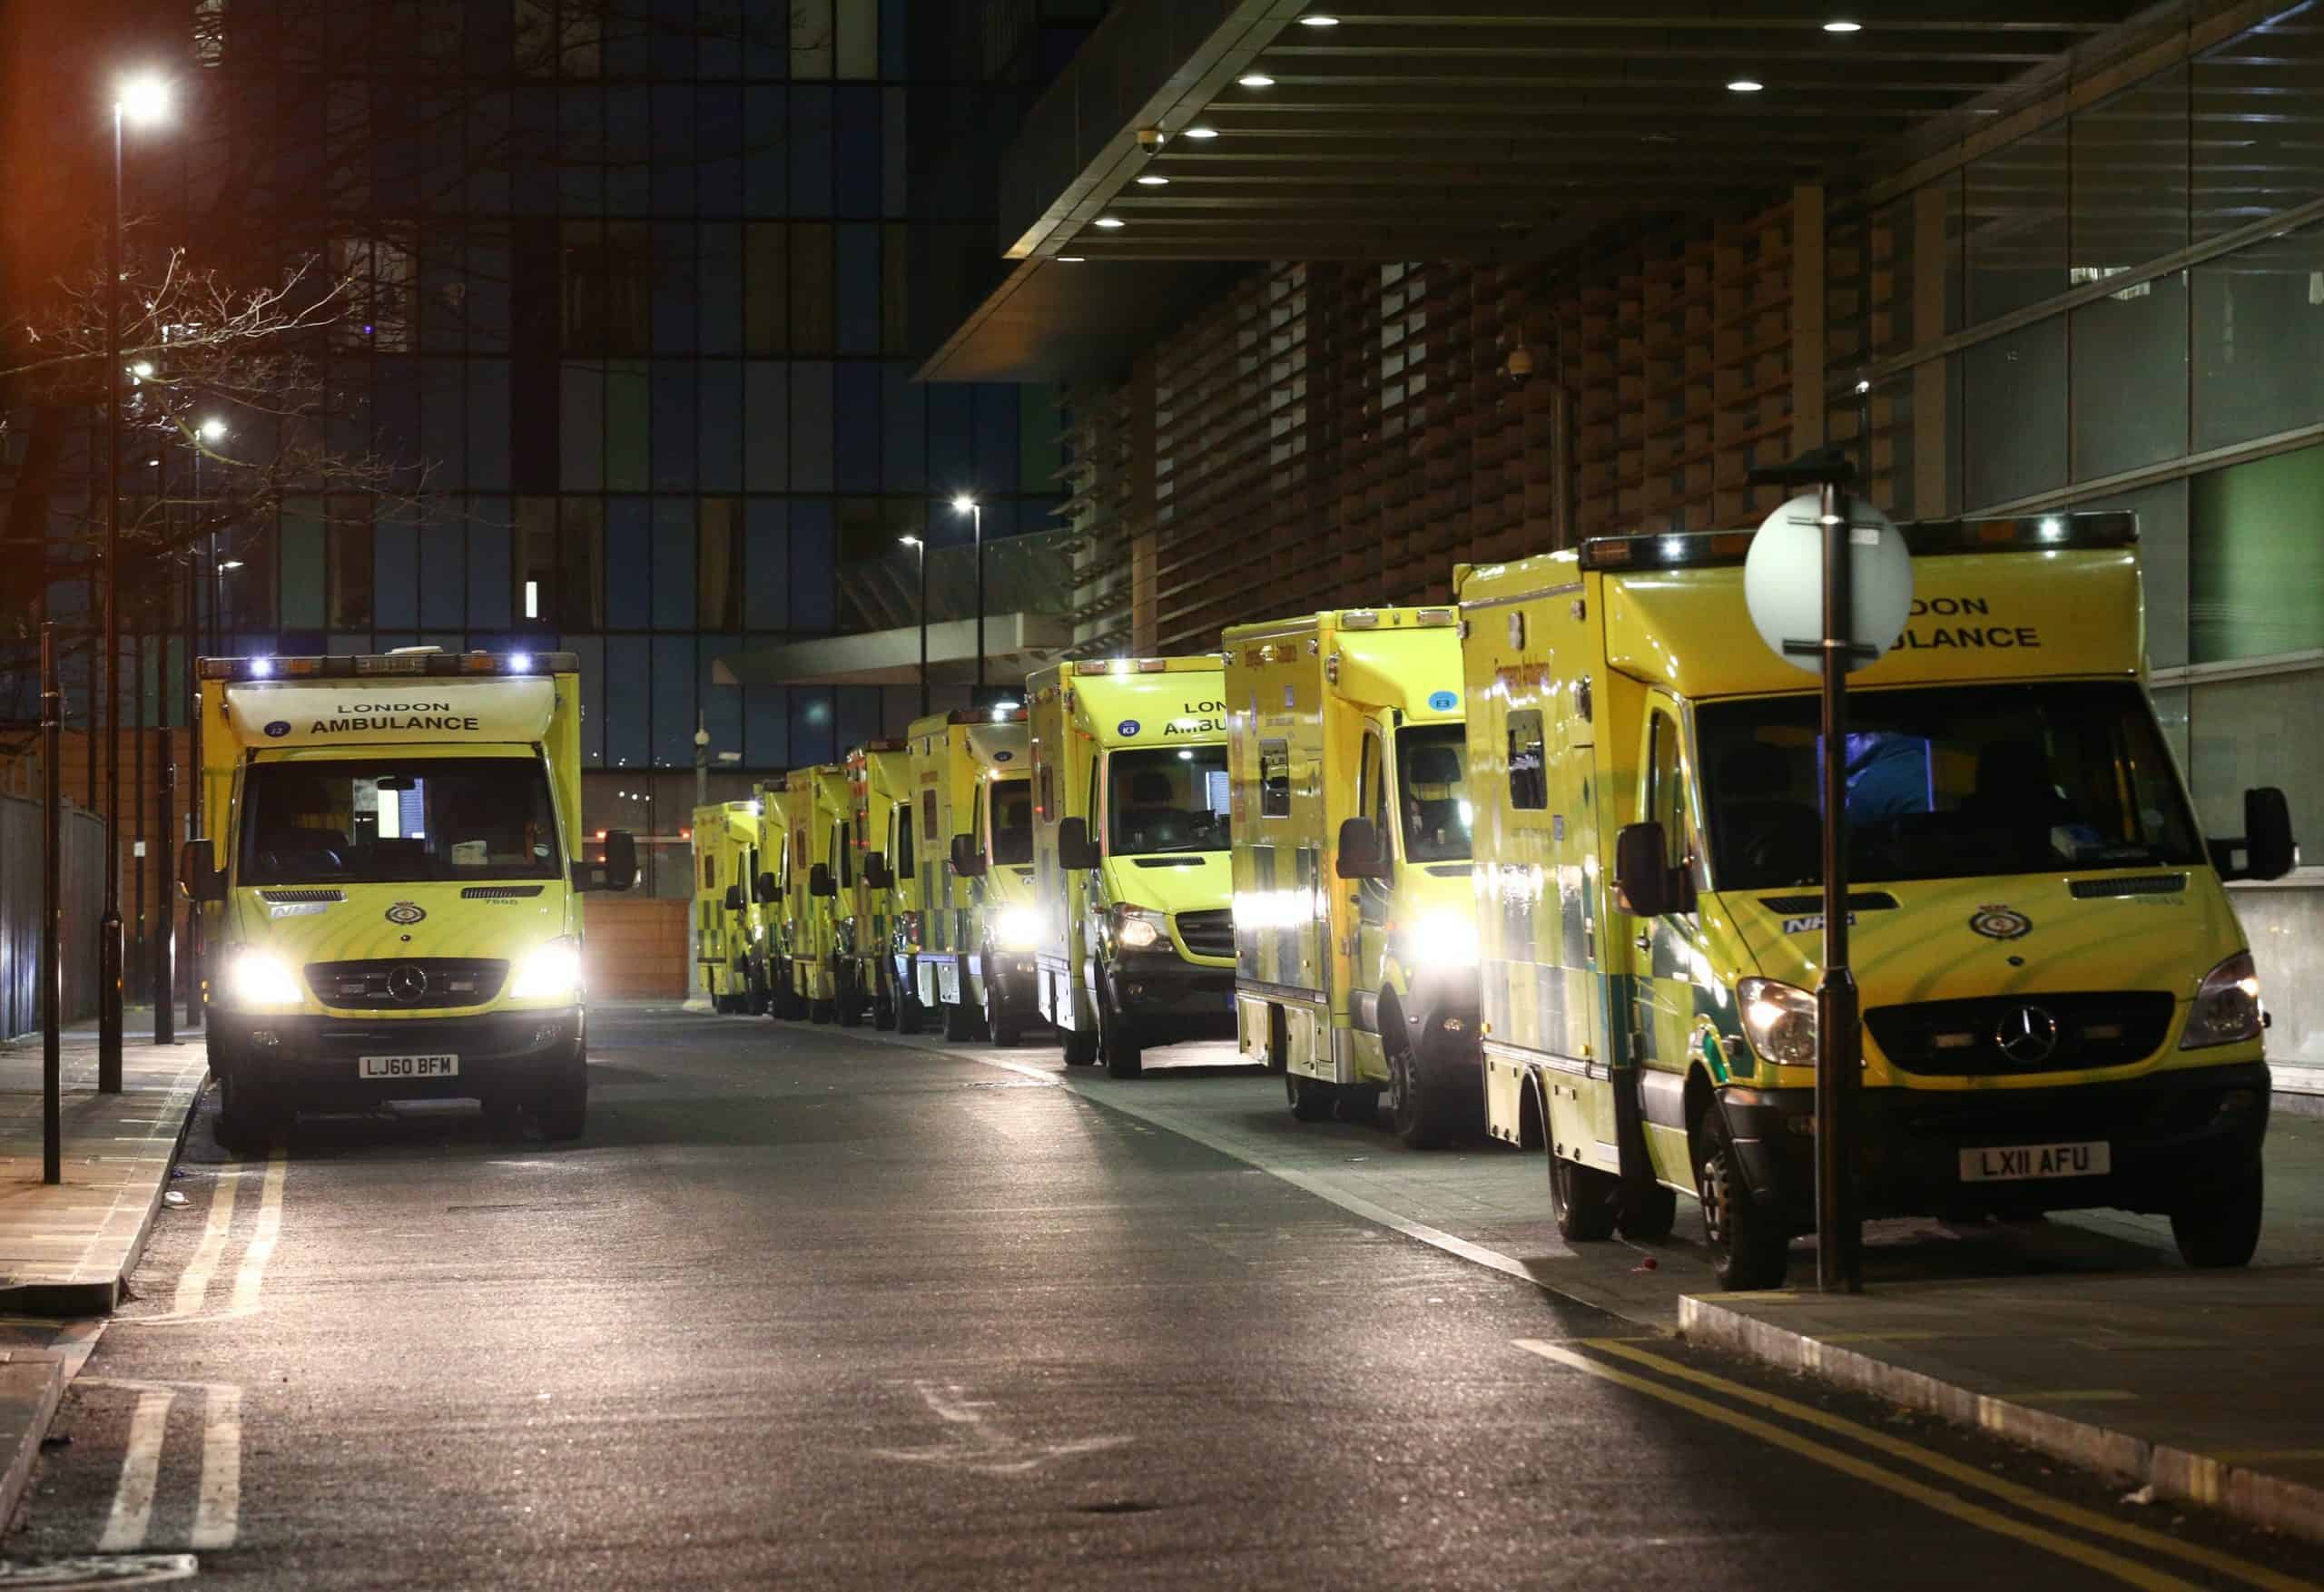 As ambulances queue up with Covid patients Toby Young tweets fake pic of empty ICU beds